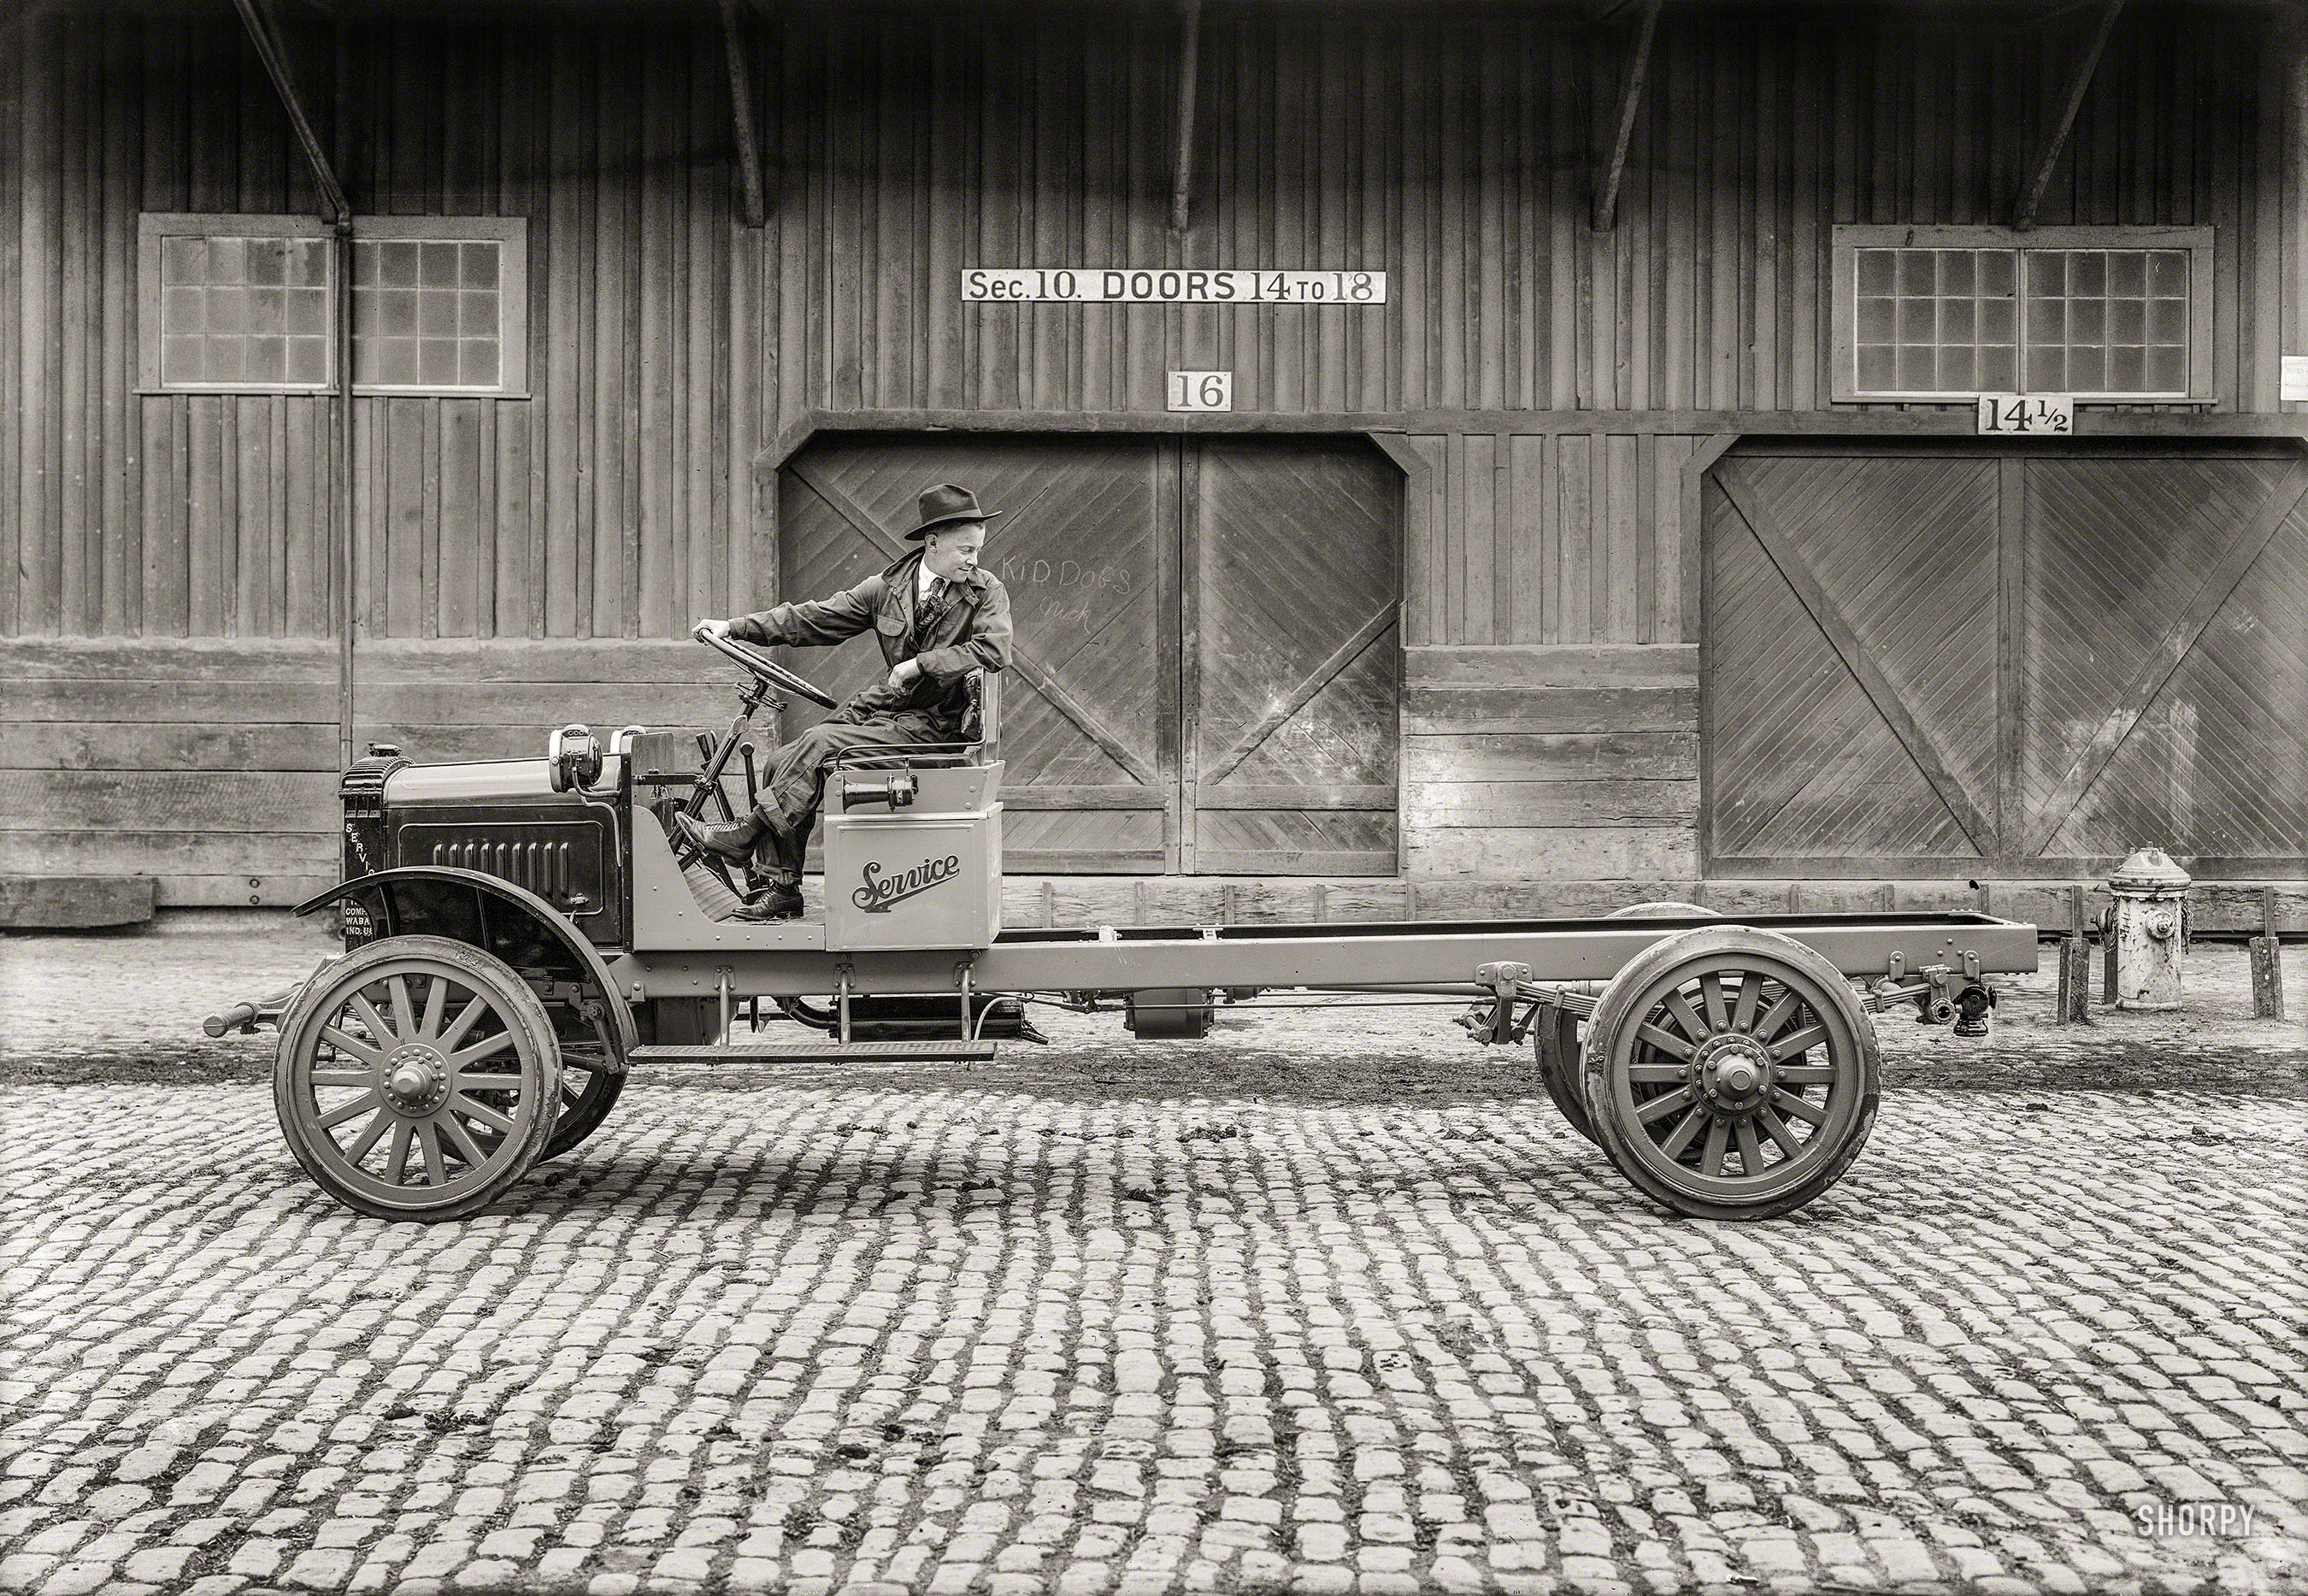 San Francisco circa 1919. "Service truck at Dodd warehouse." If anyone knows the whereabouts of Nick and his piece of chalk, the foreman would like to see him in the warehouse office. 5x7 glass negative by Christopher Helin. View full size.